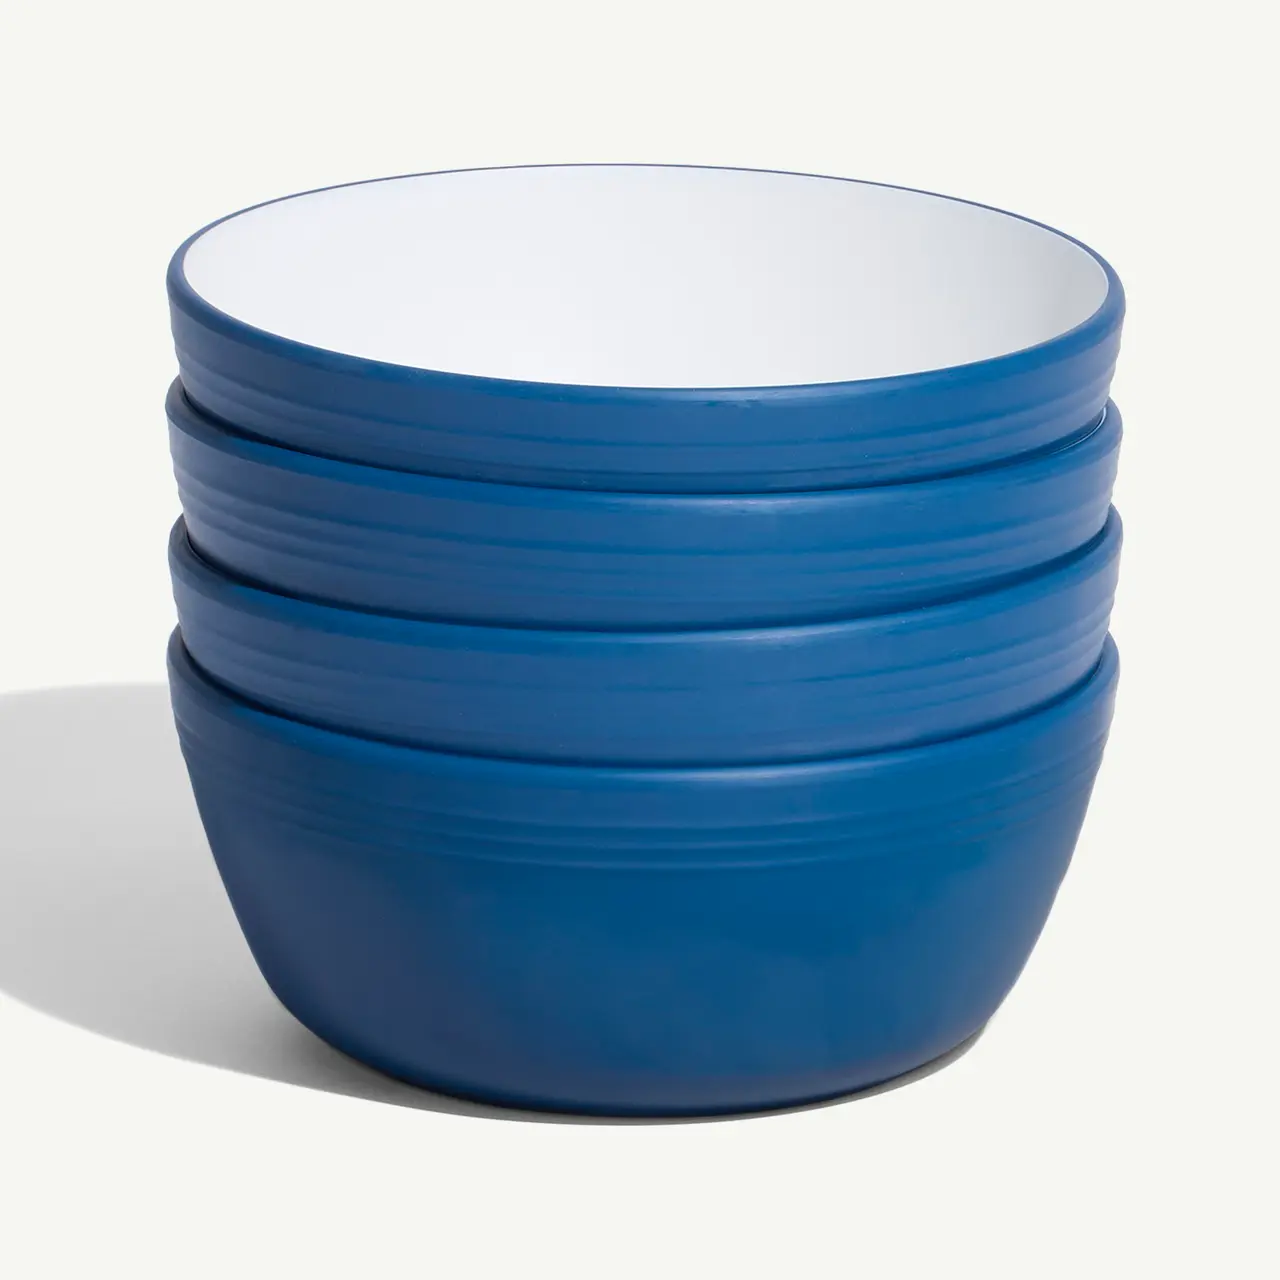 A stack of blue ceramic bowls on a plain background.